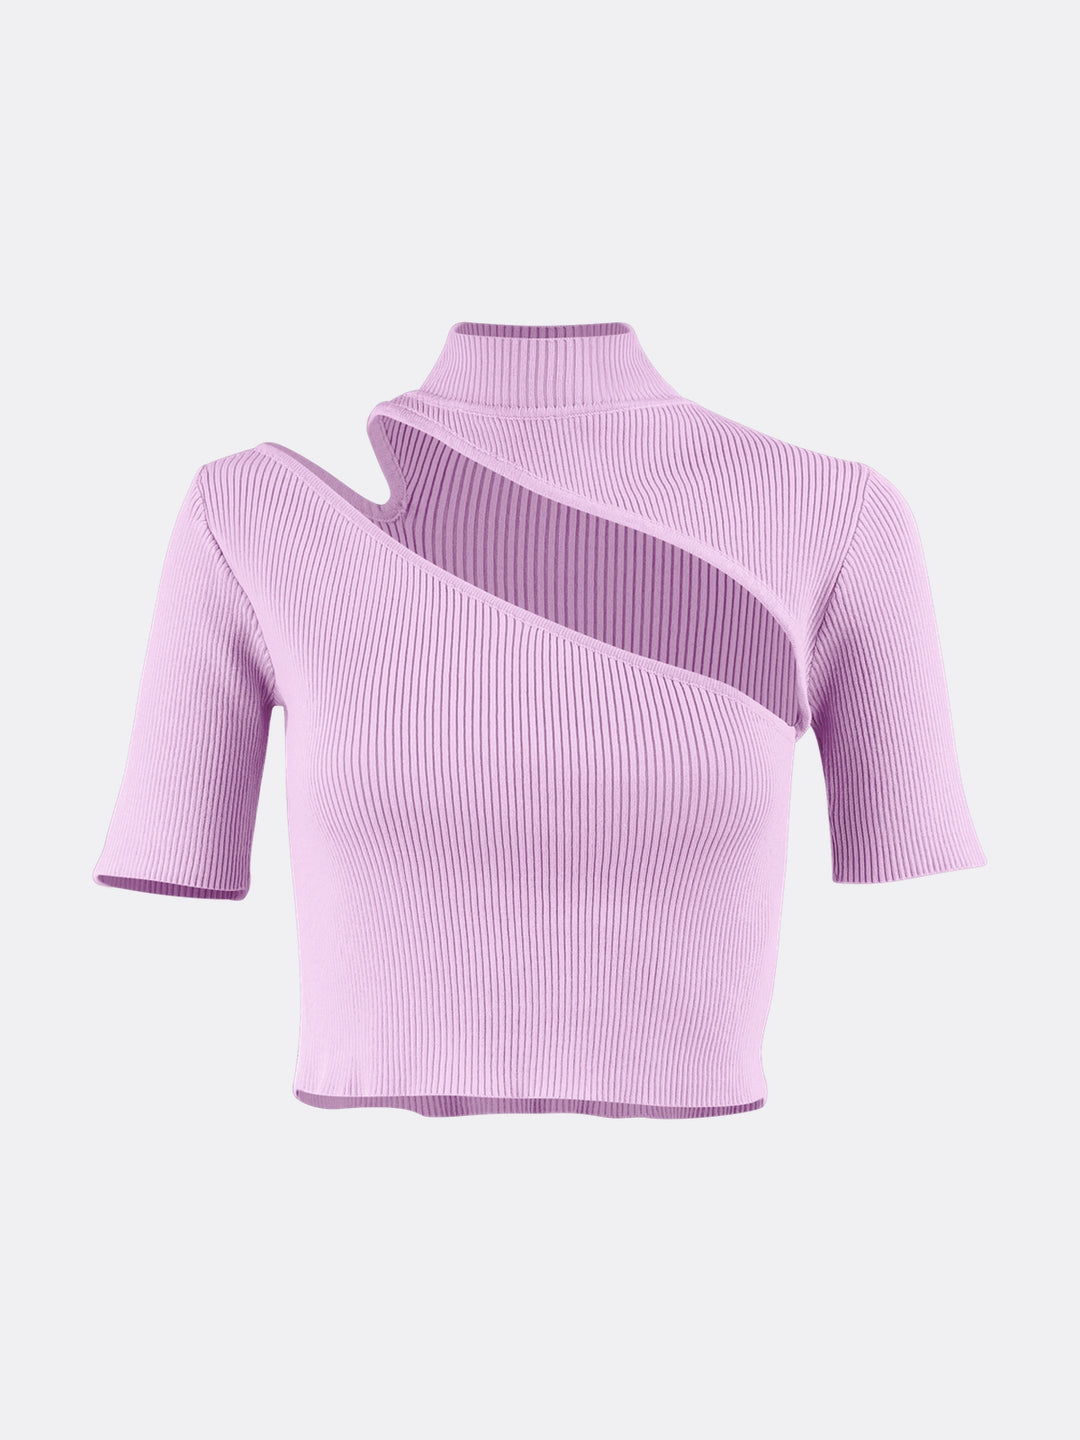 High Neck Short Sleeve Knitted Ribbed Crop Top with Cut Out Pink Ghost | Jolovies